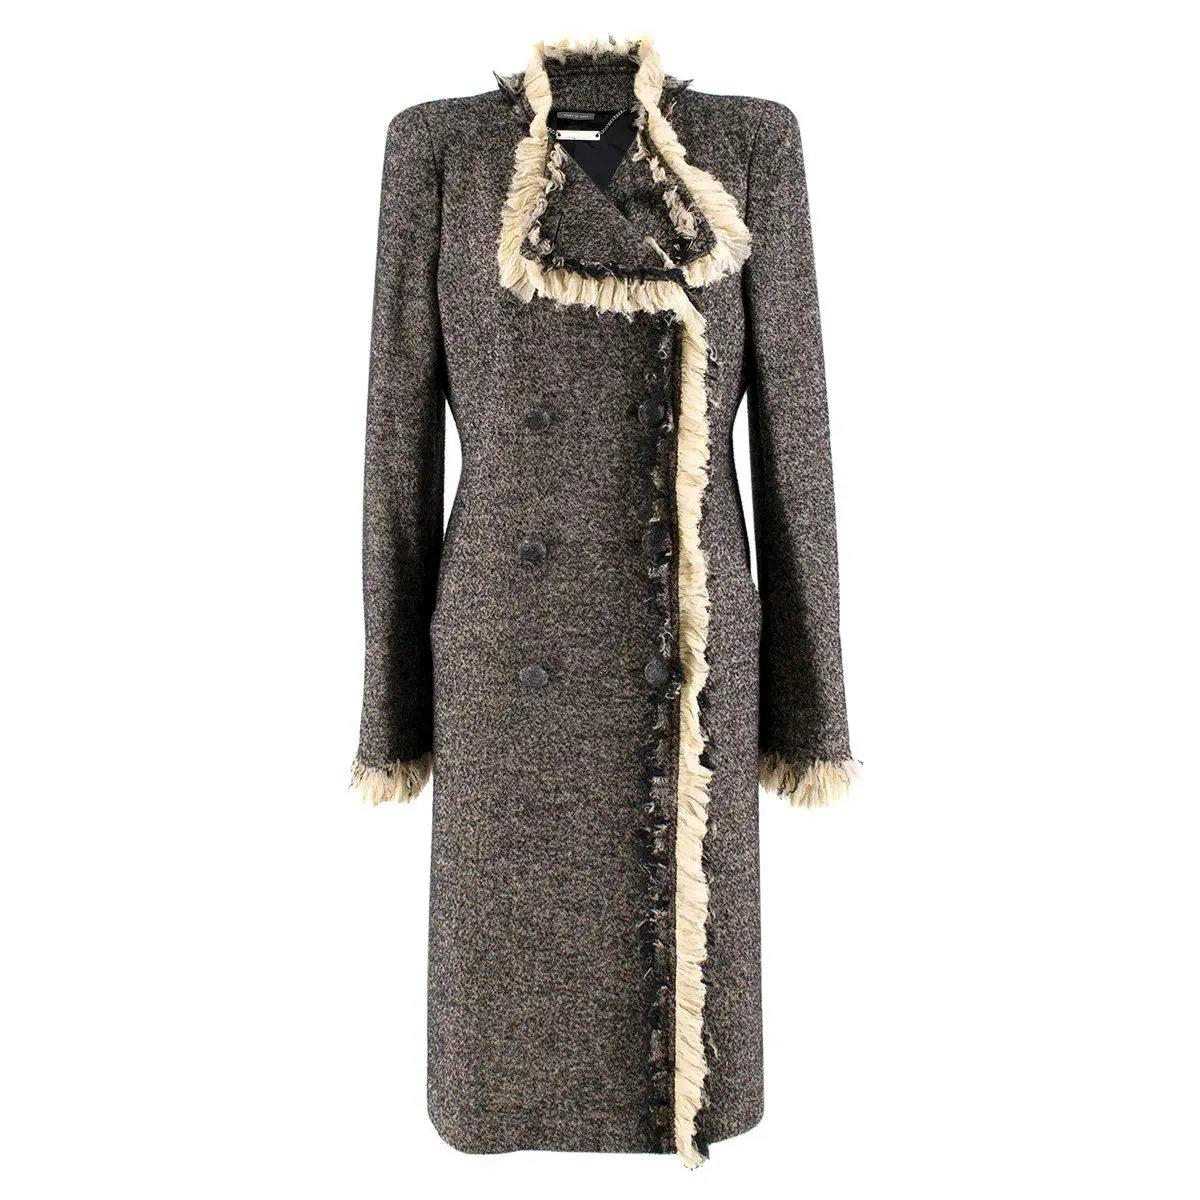 Alexander McQueen Tweed Coat with Ruffles
Pre-Fall 2010
Size: IT - 40, US - 4
Made in Italy
Excellent condition
New, with tags